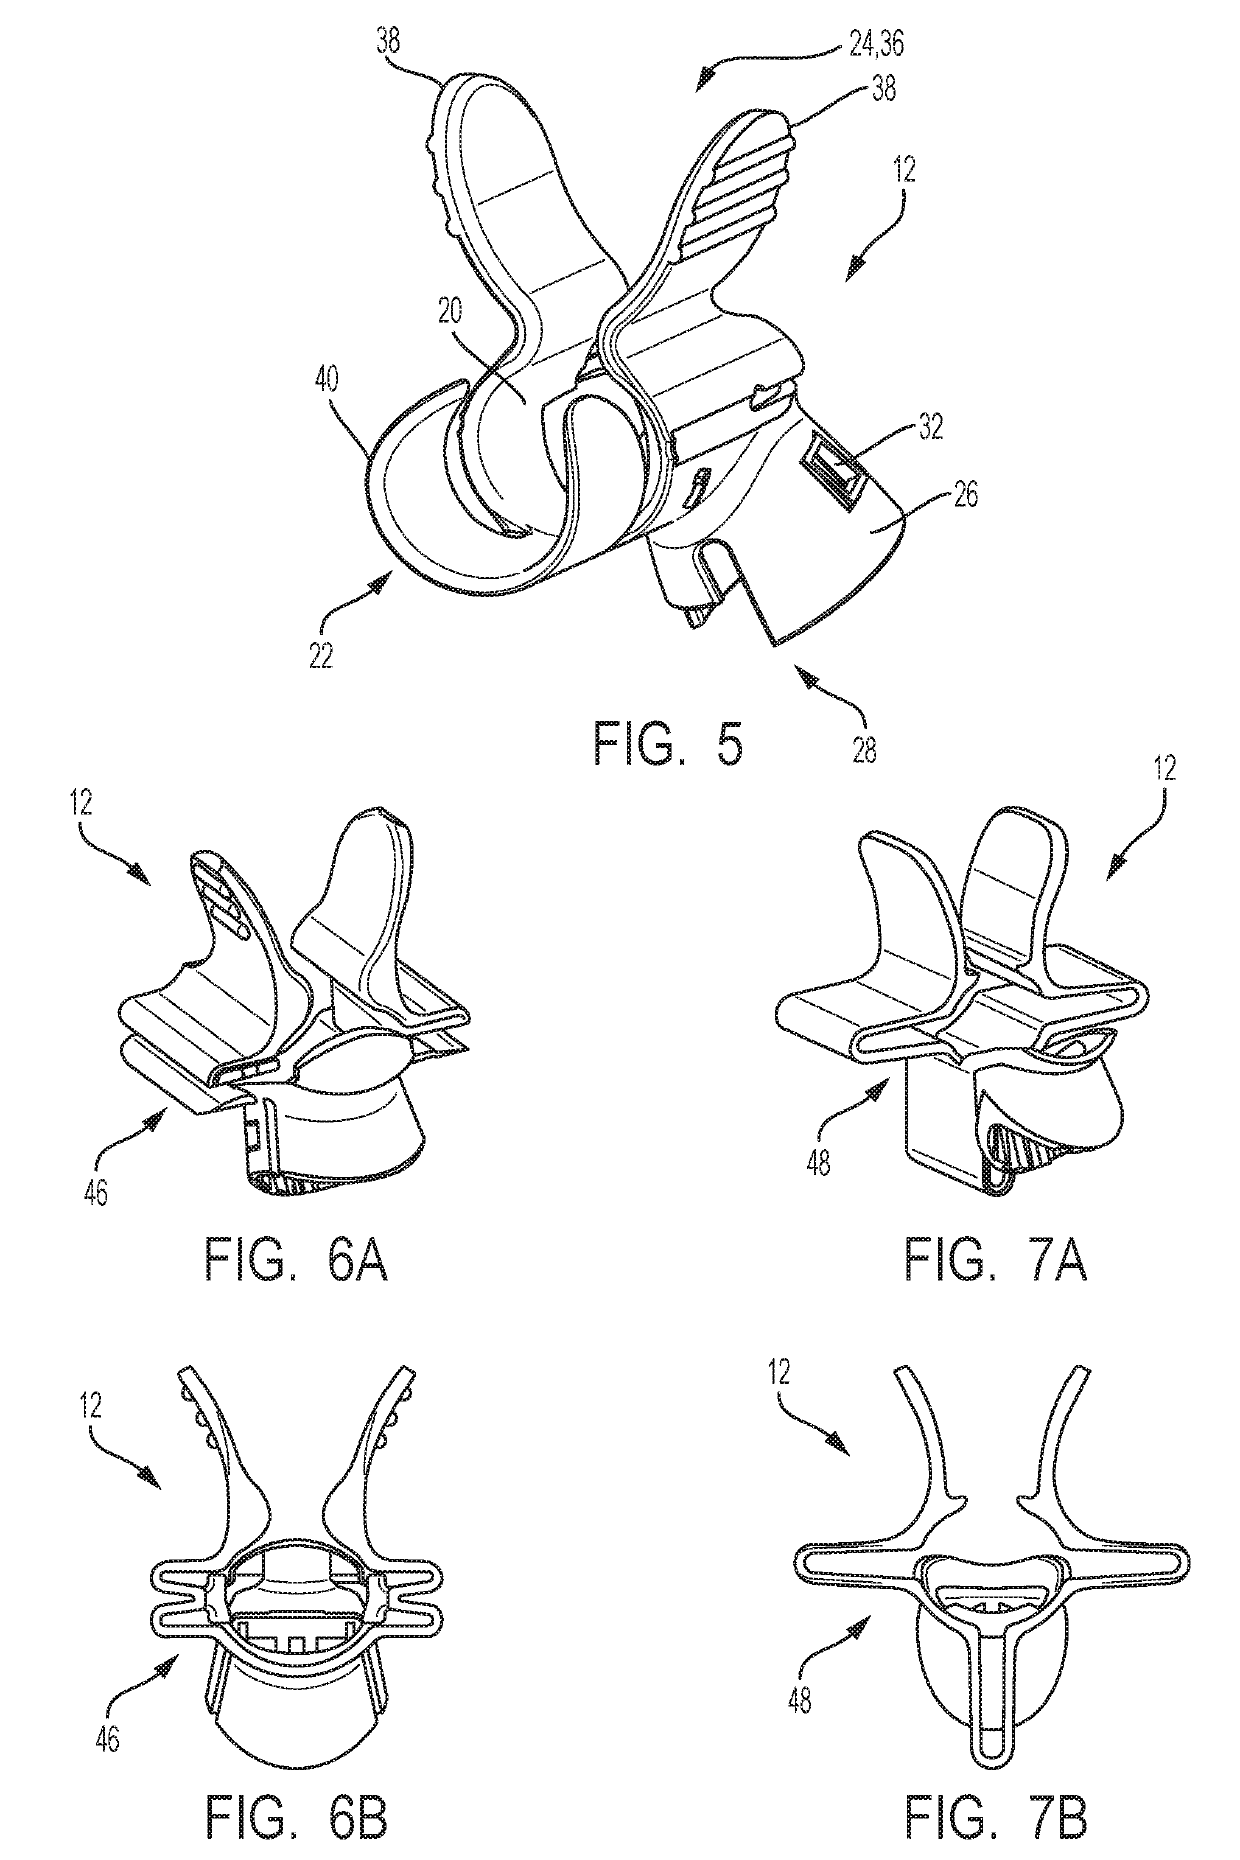 Device for Obtaining a Blood Sample